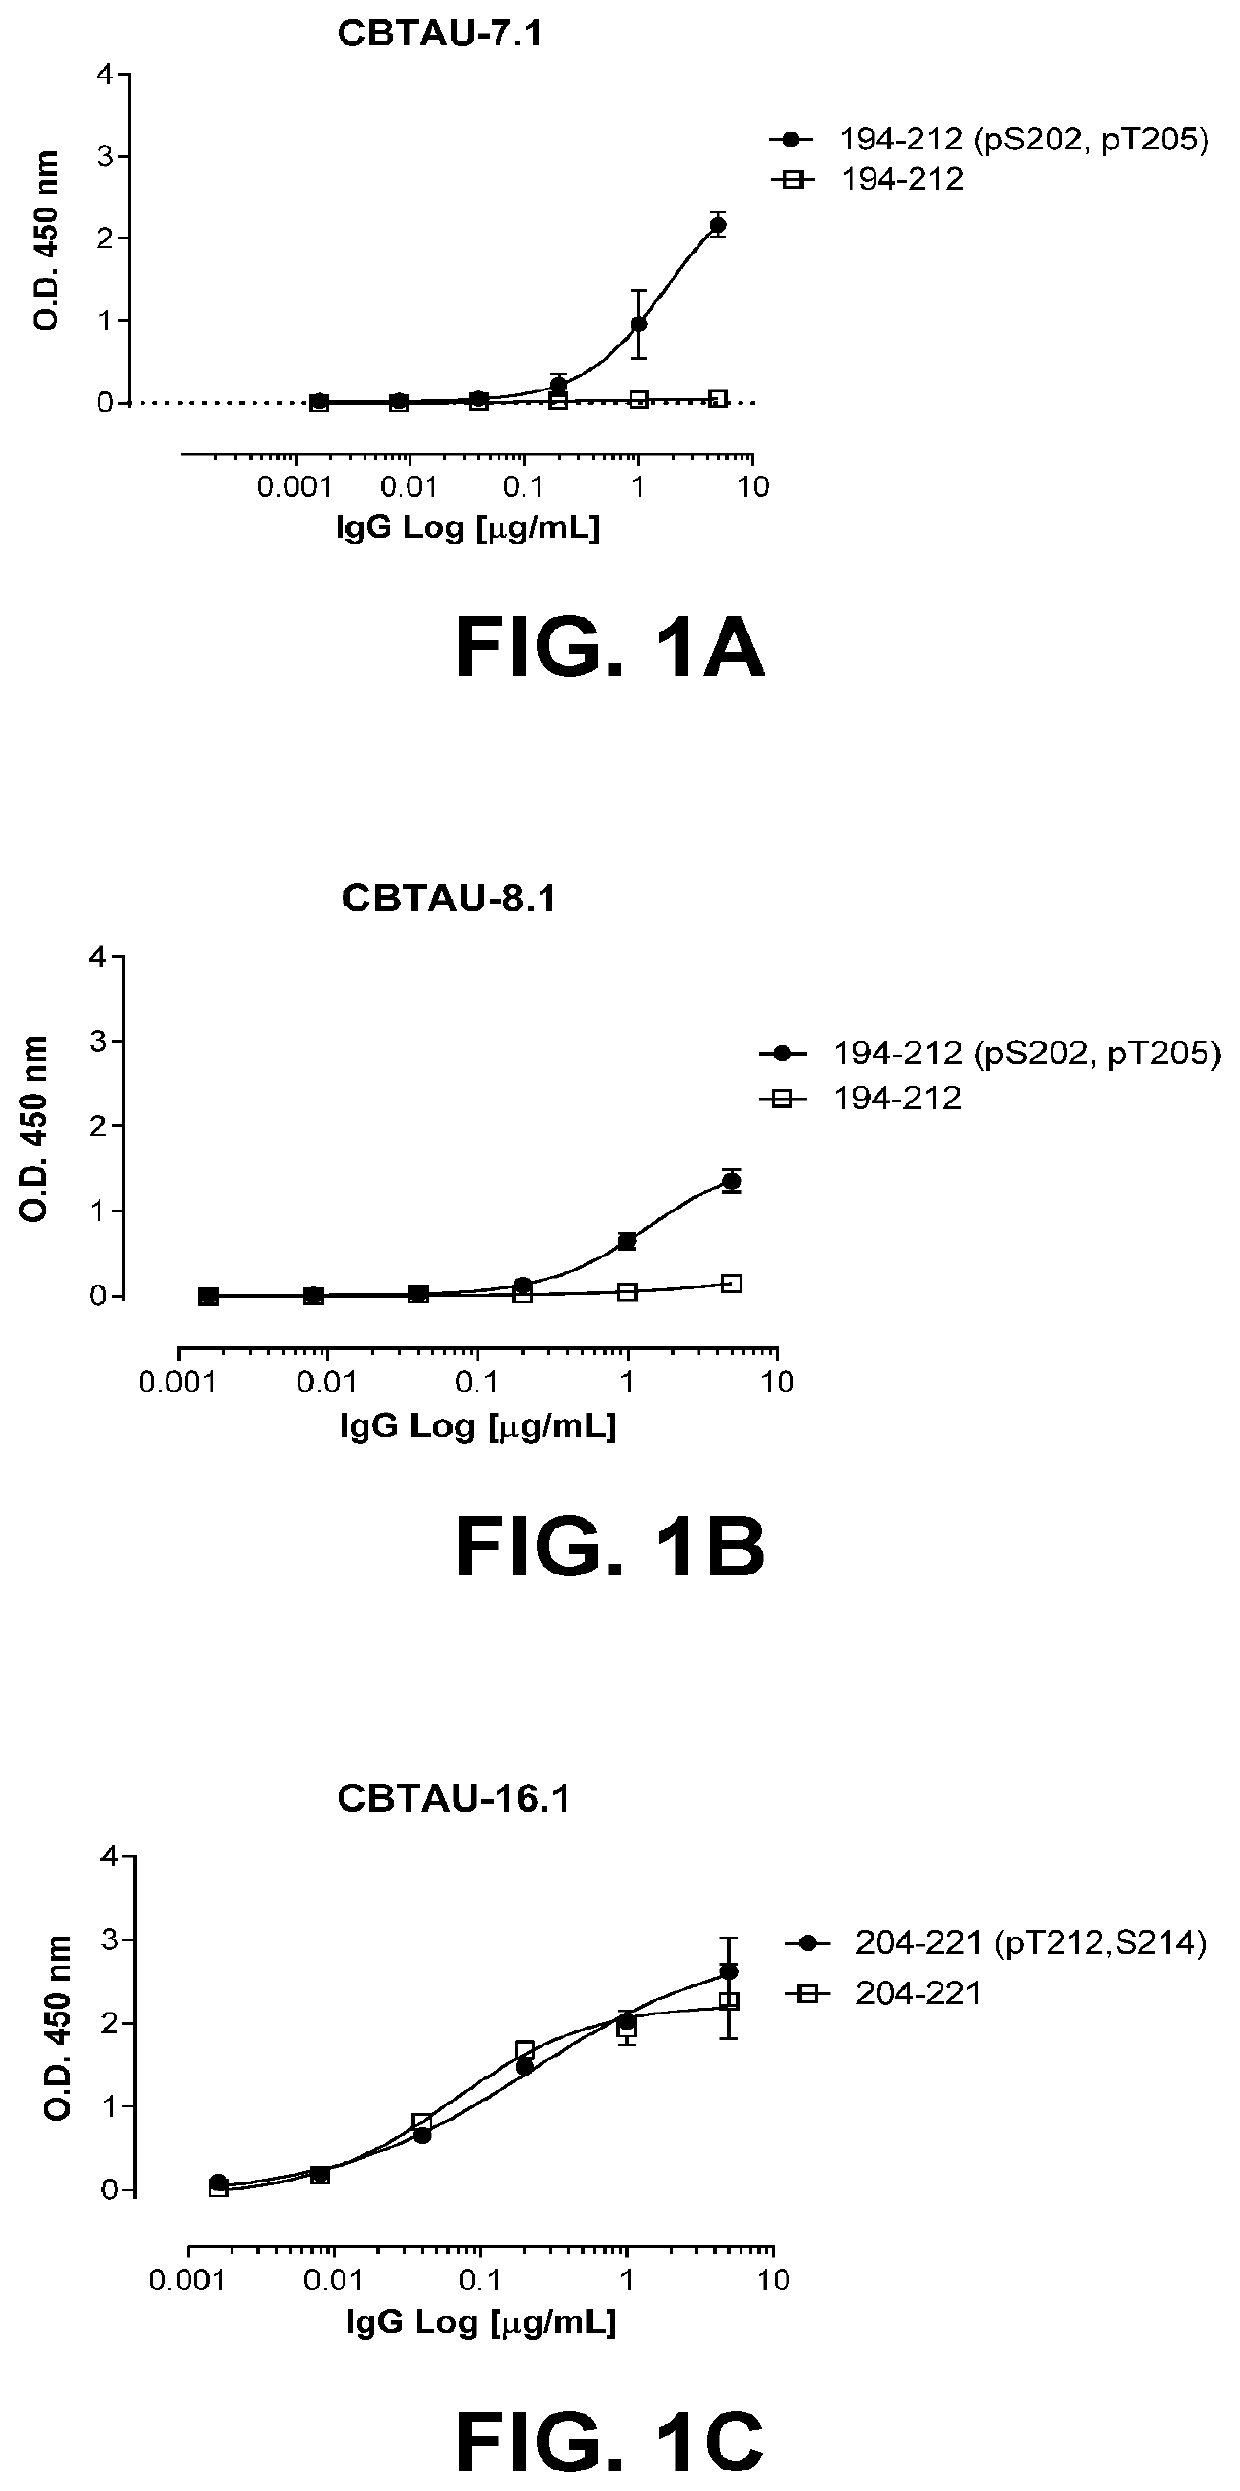 Antibodies and antigen-binding fragments that specifically bind to microtubule-associated protein tau